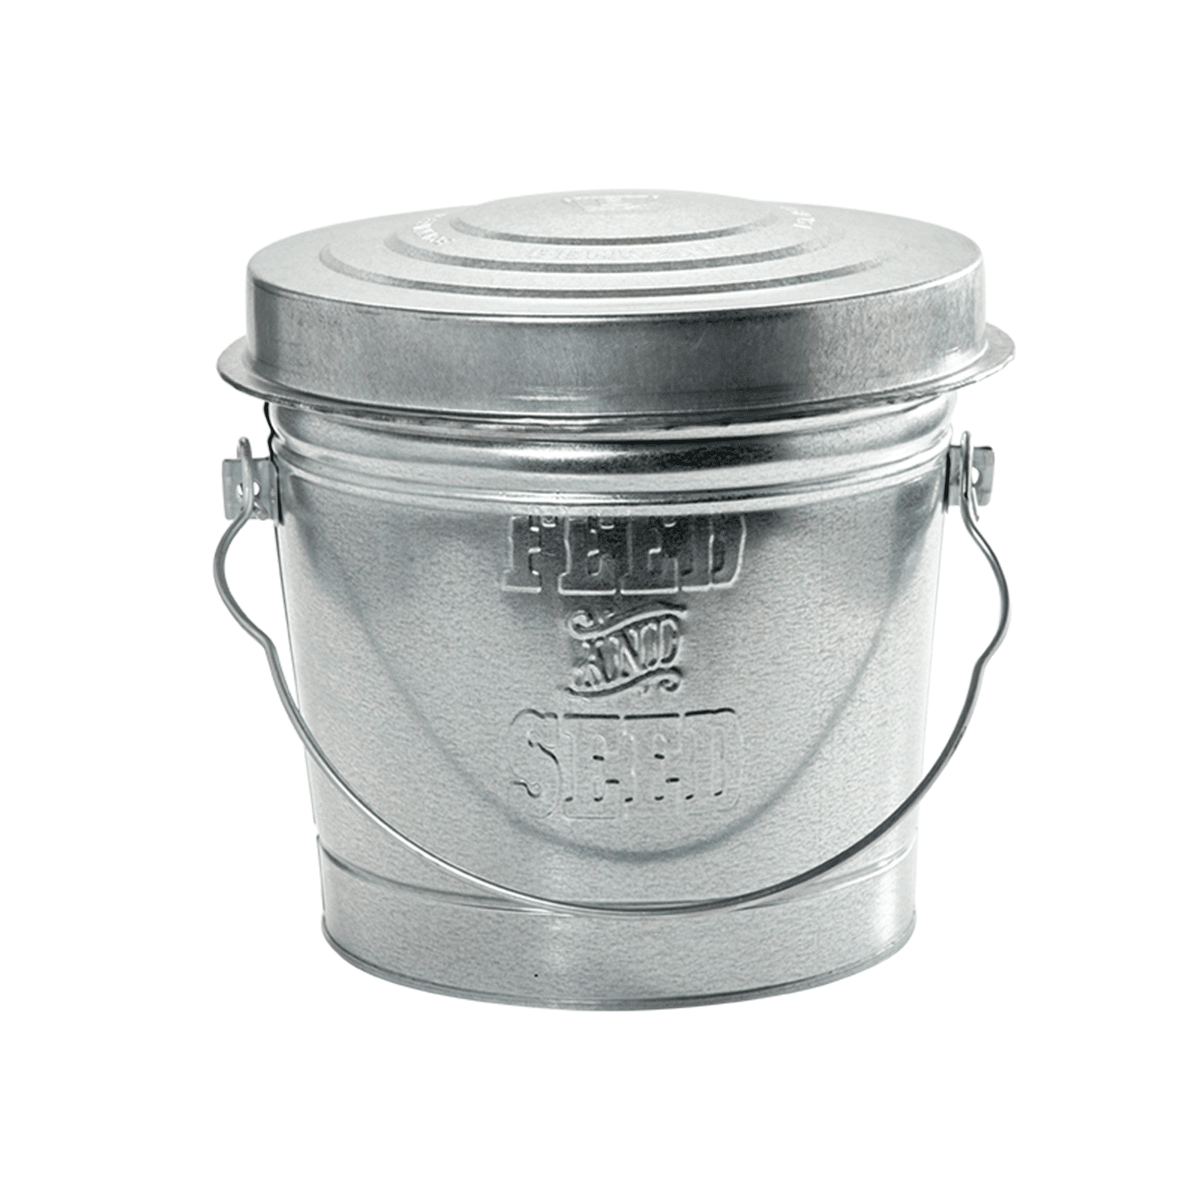 Behrens feed & seed can with Infinity Lid